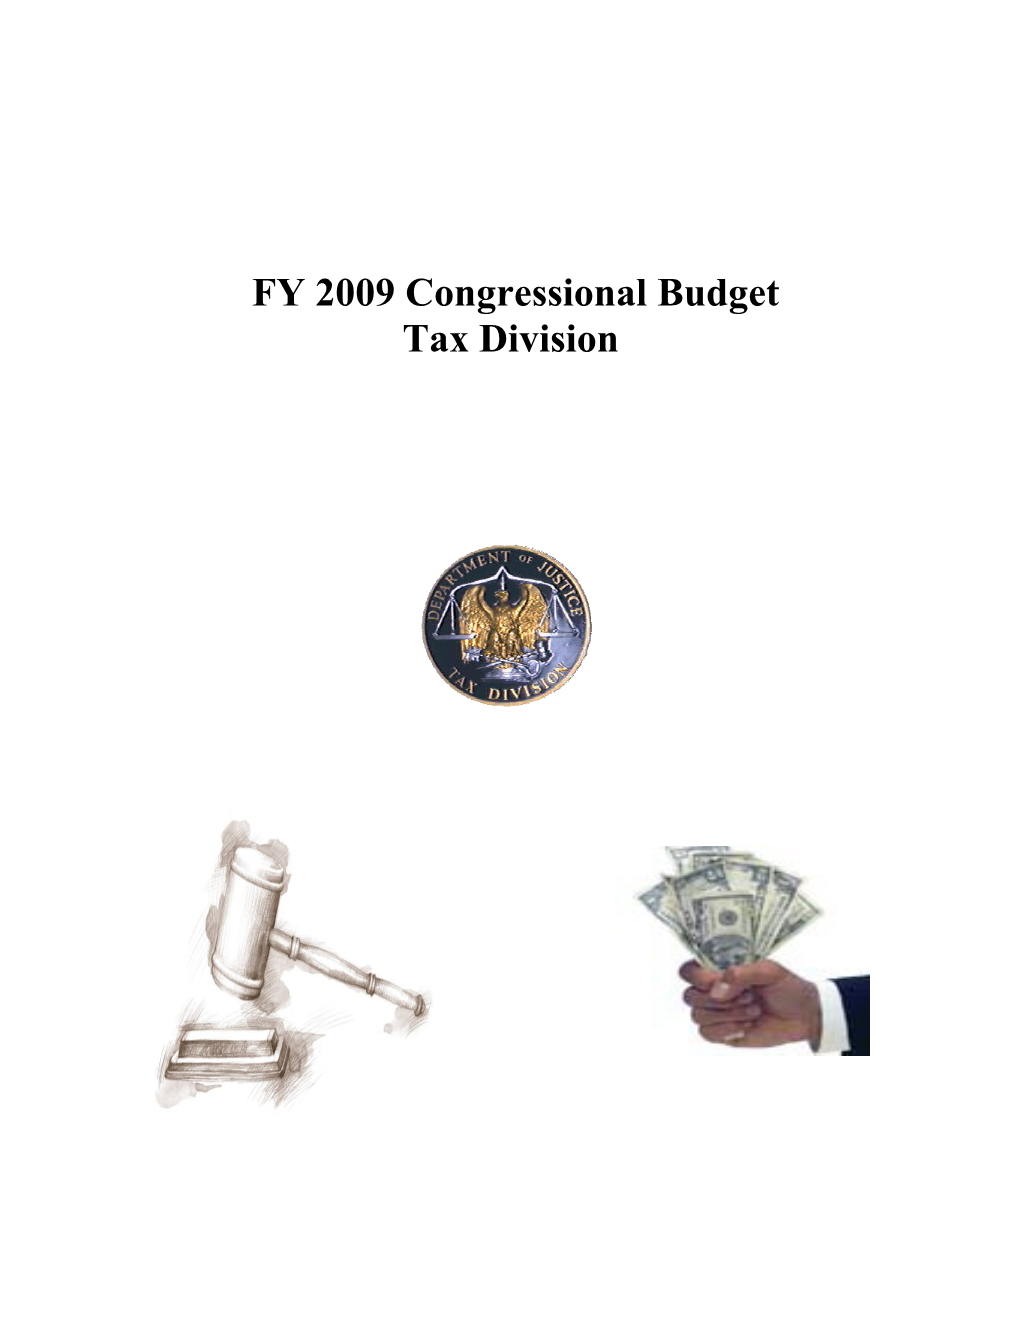 Tax Division Budget Request